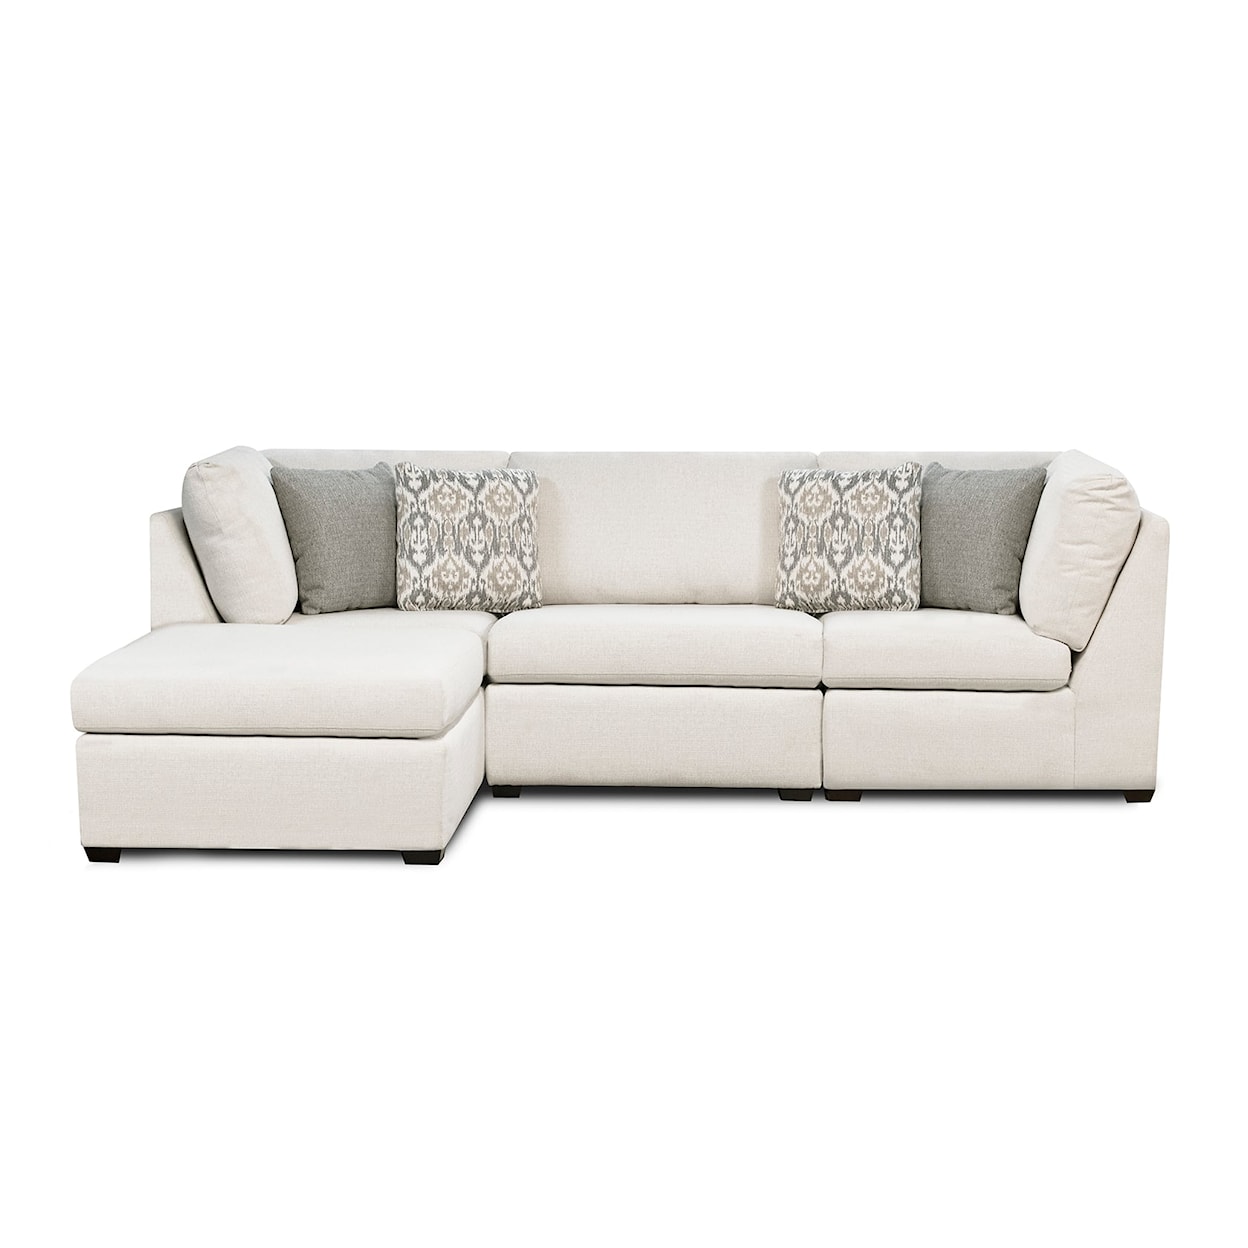 Dimensions 9F00 Series 4-Piece Armless Sectional Sofa